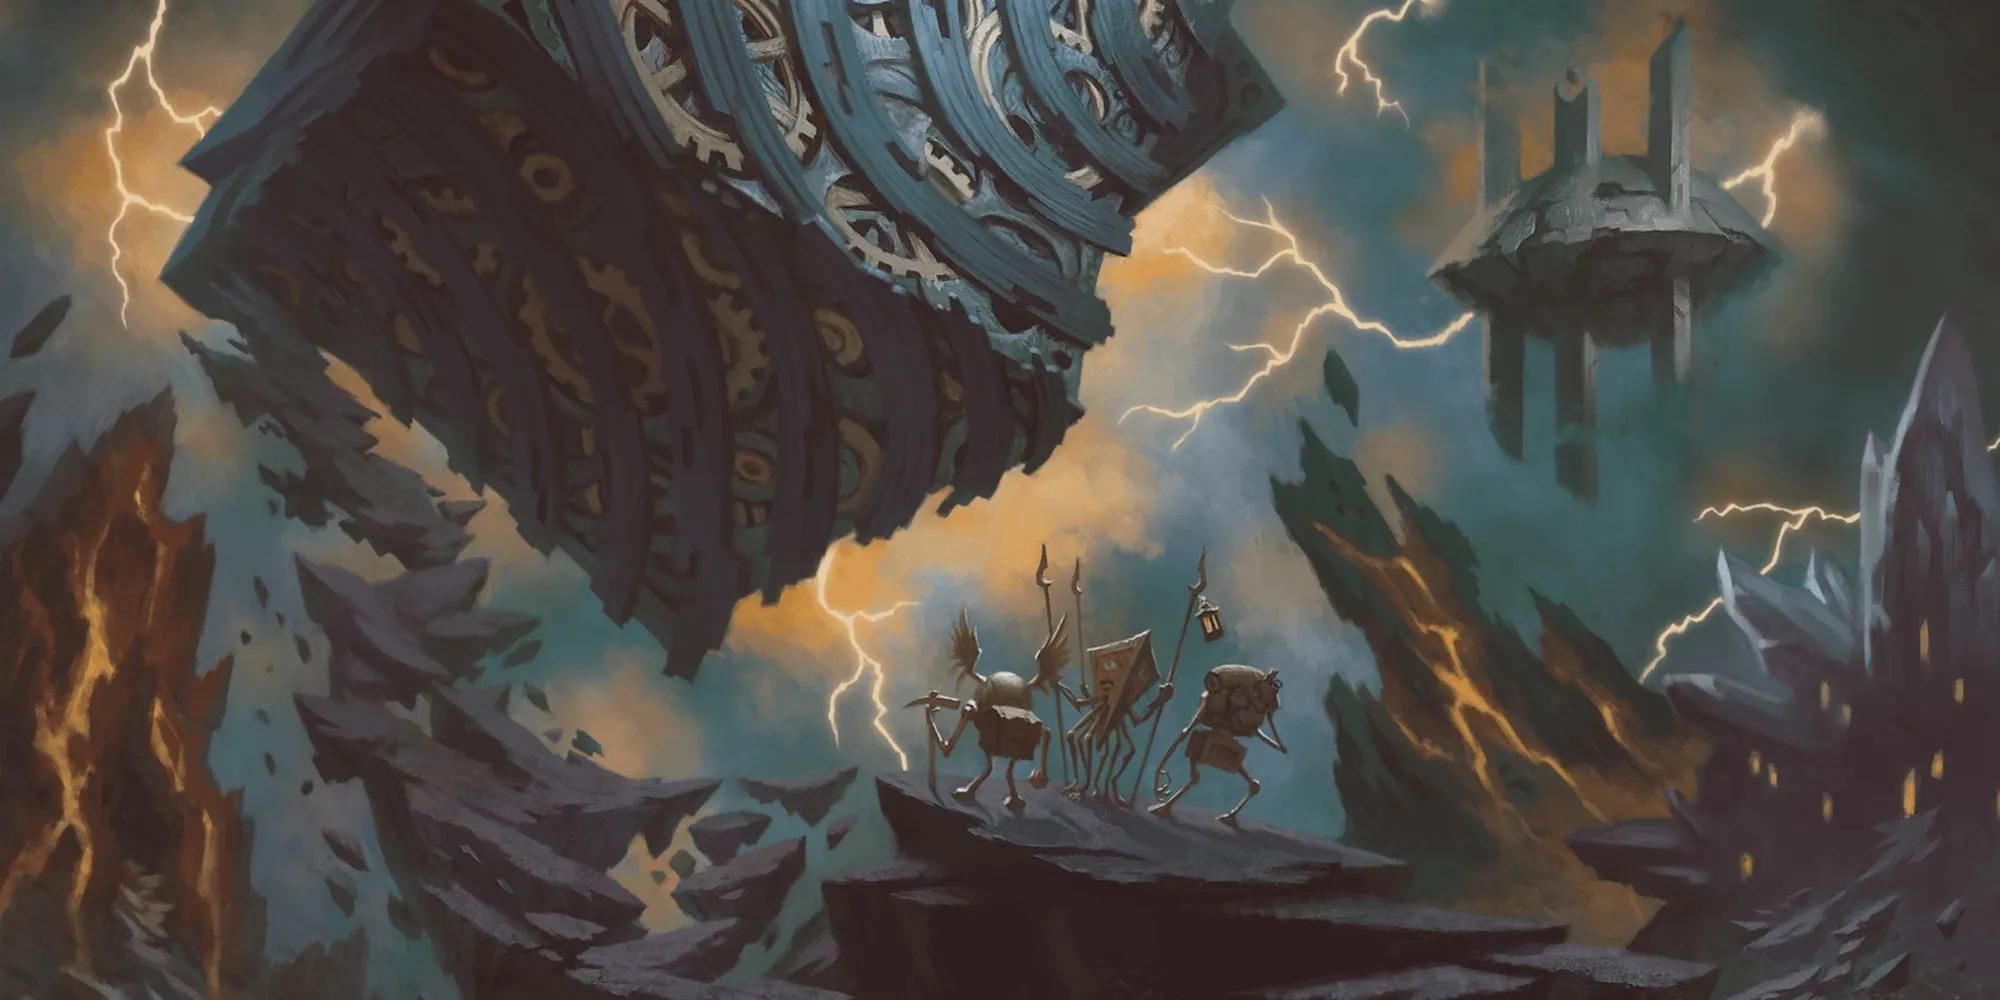 Xaos in a stormy realm with floating platforms and a floating cube in D&D Artwork